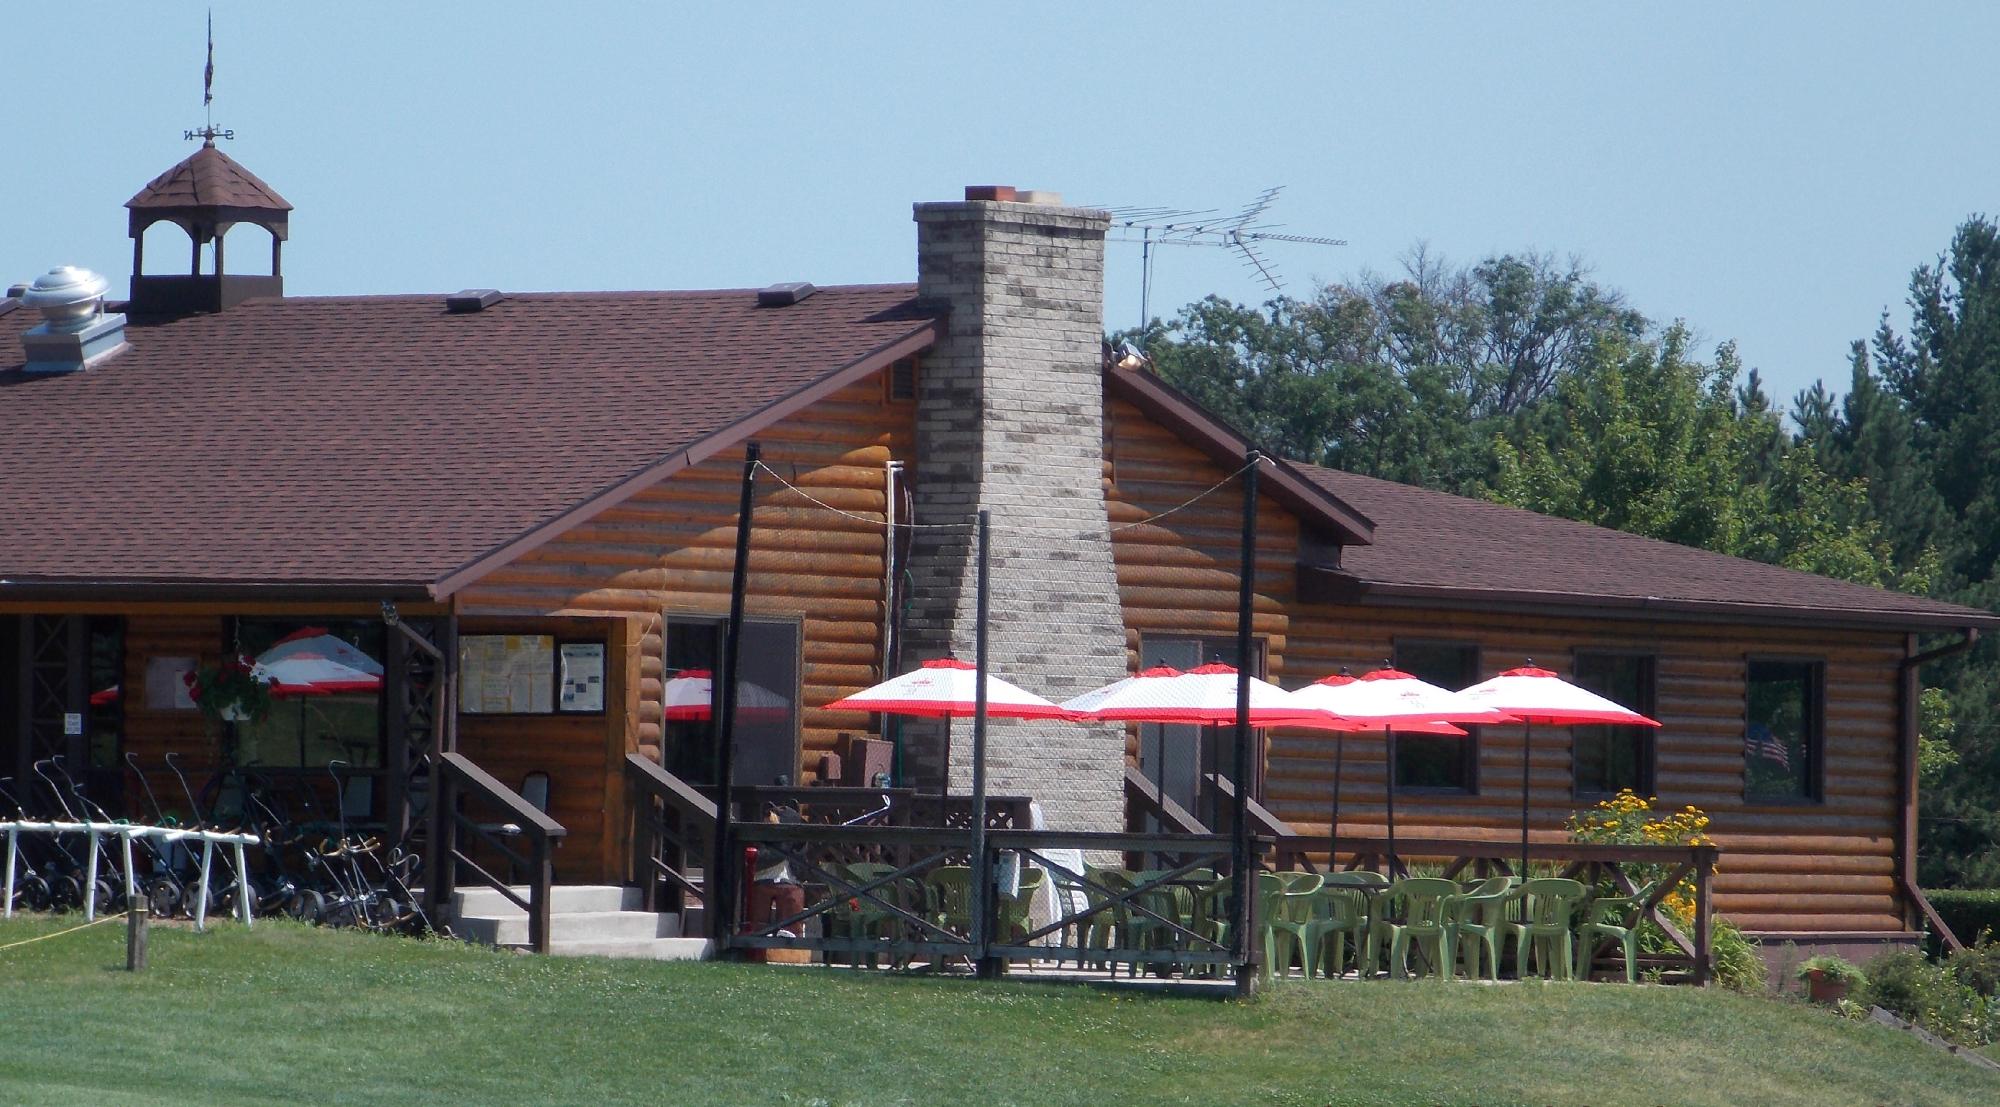 Desmidt's Golf Course & Country Club